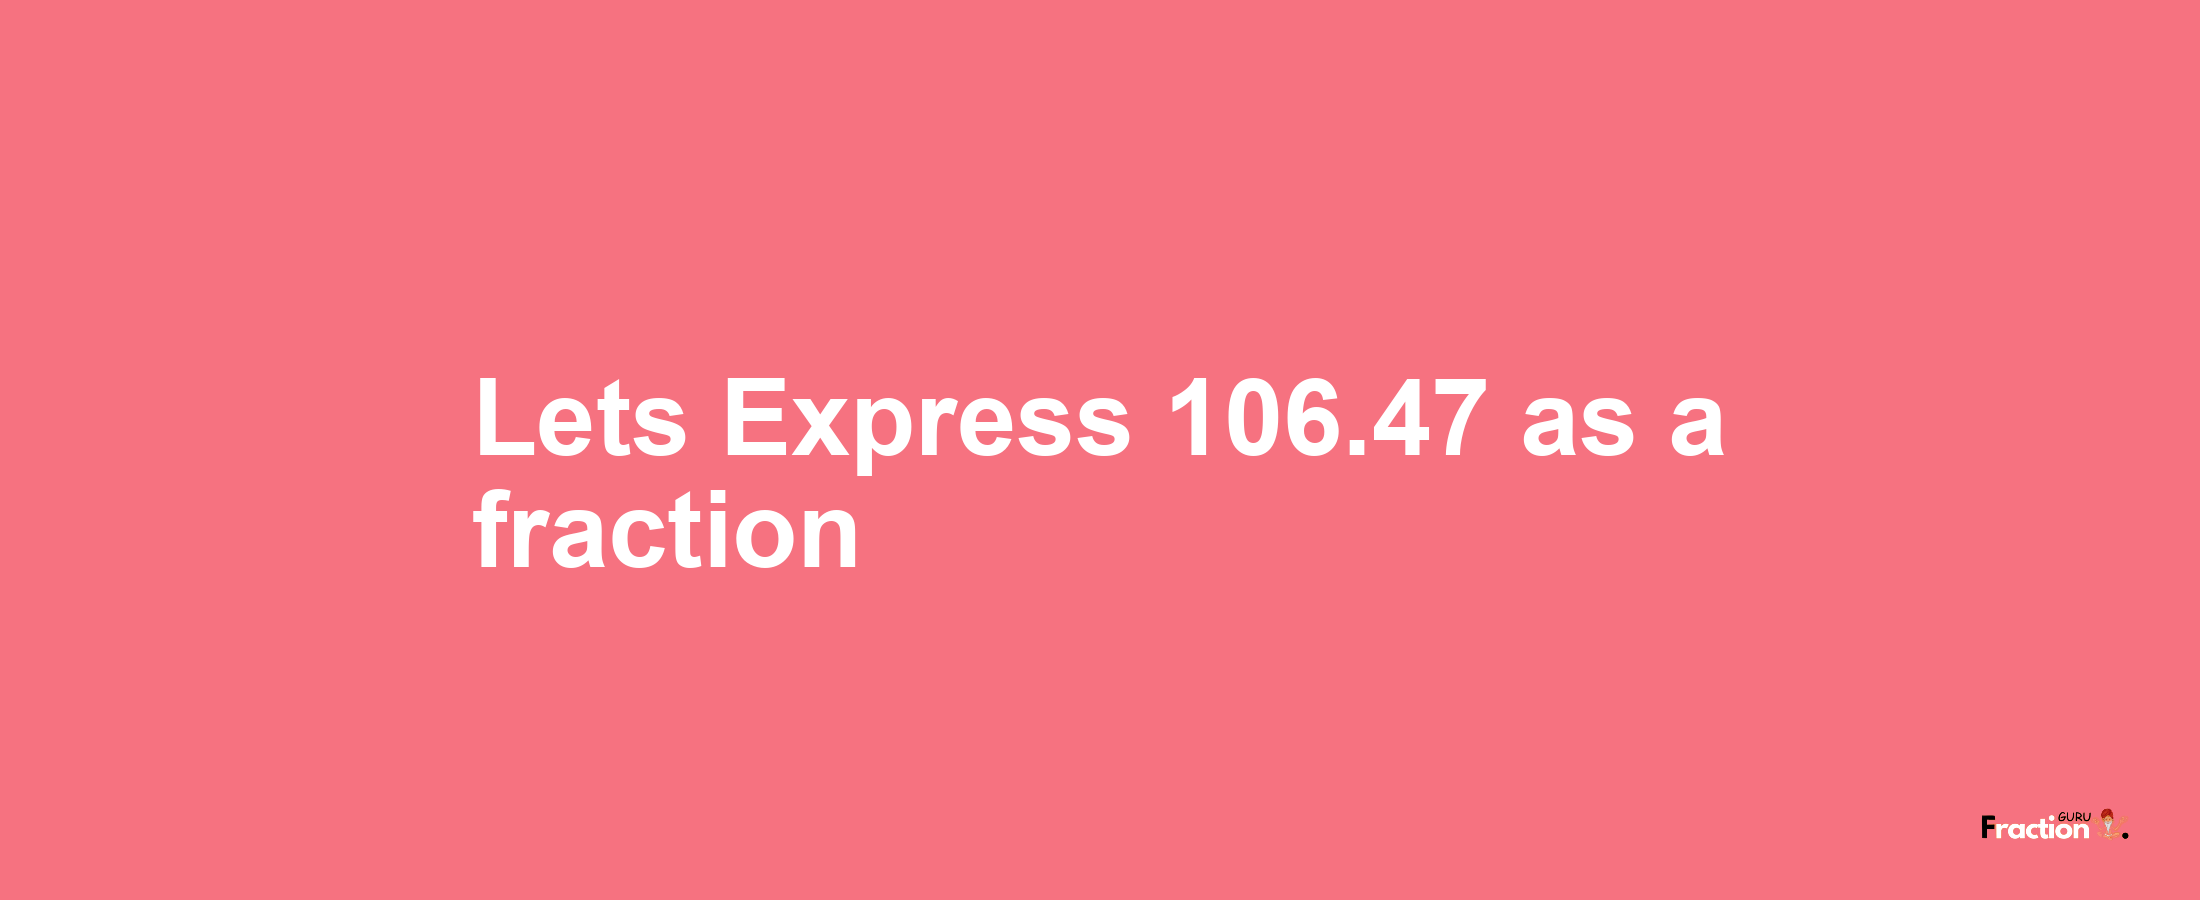 Lets Express 106.47 as afraction